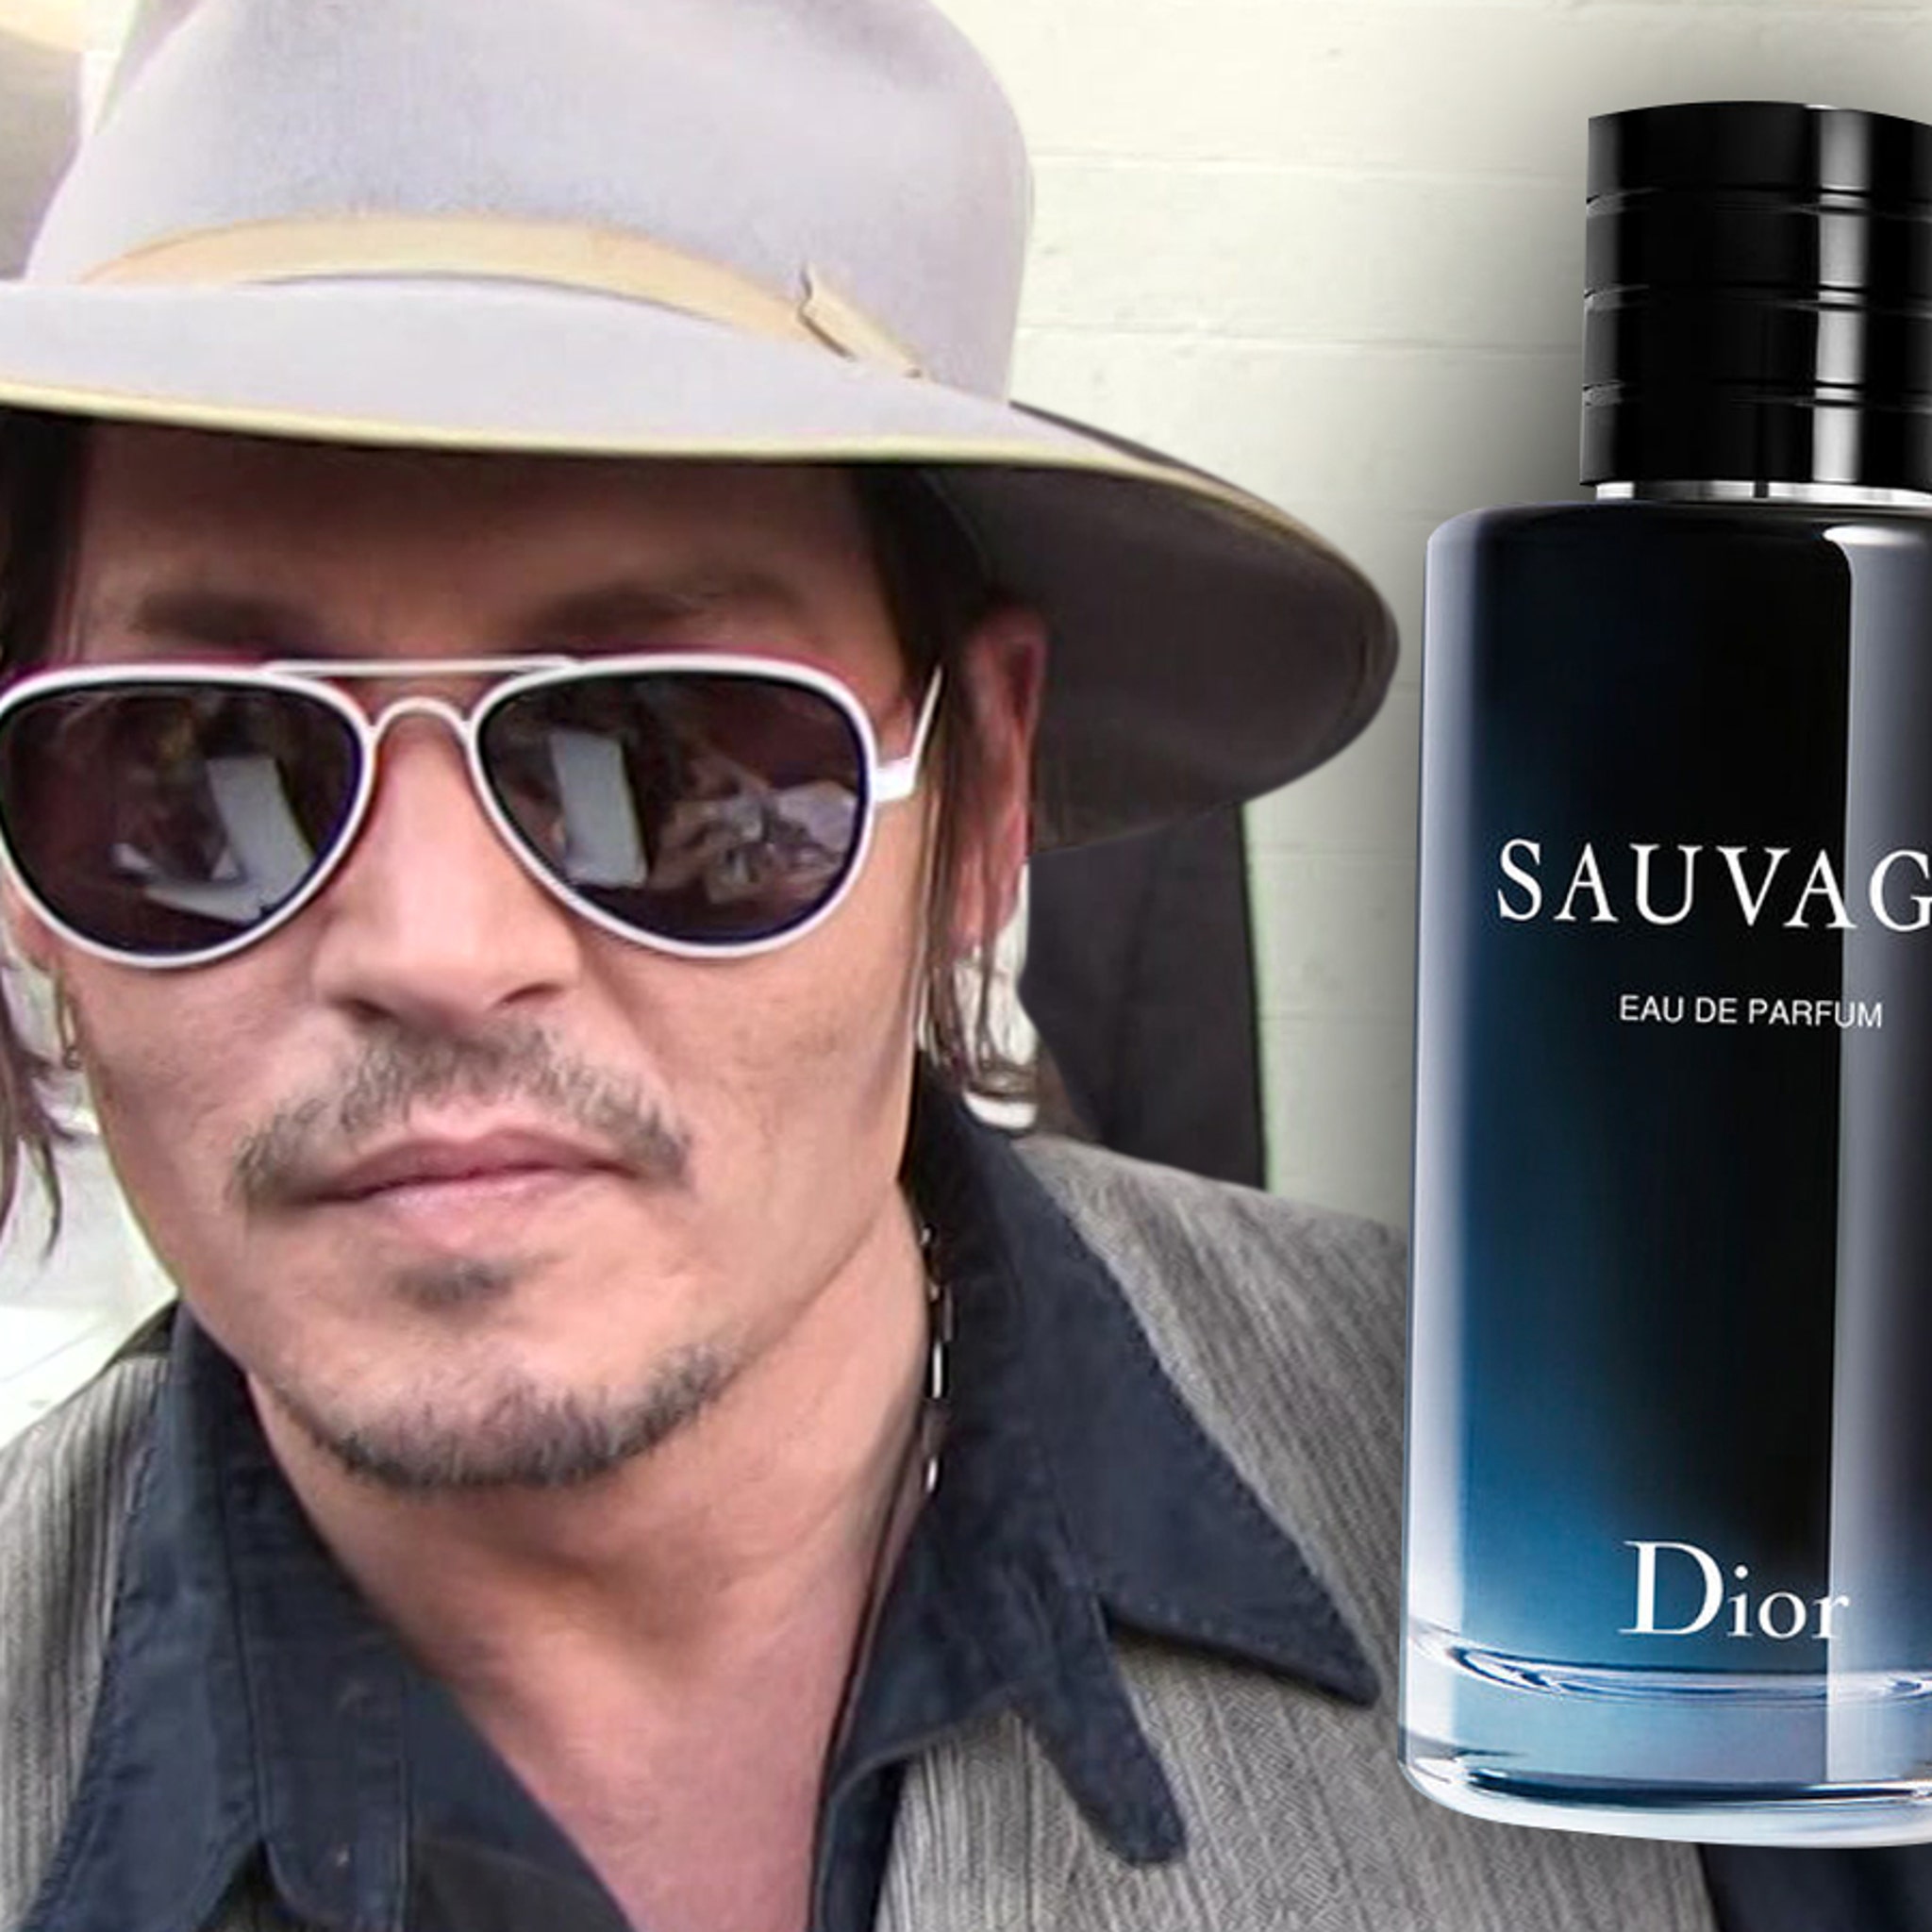 Johnny Depp Signs New Deal With Dior To Come Back As Face Of Sauvage ...